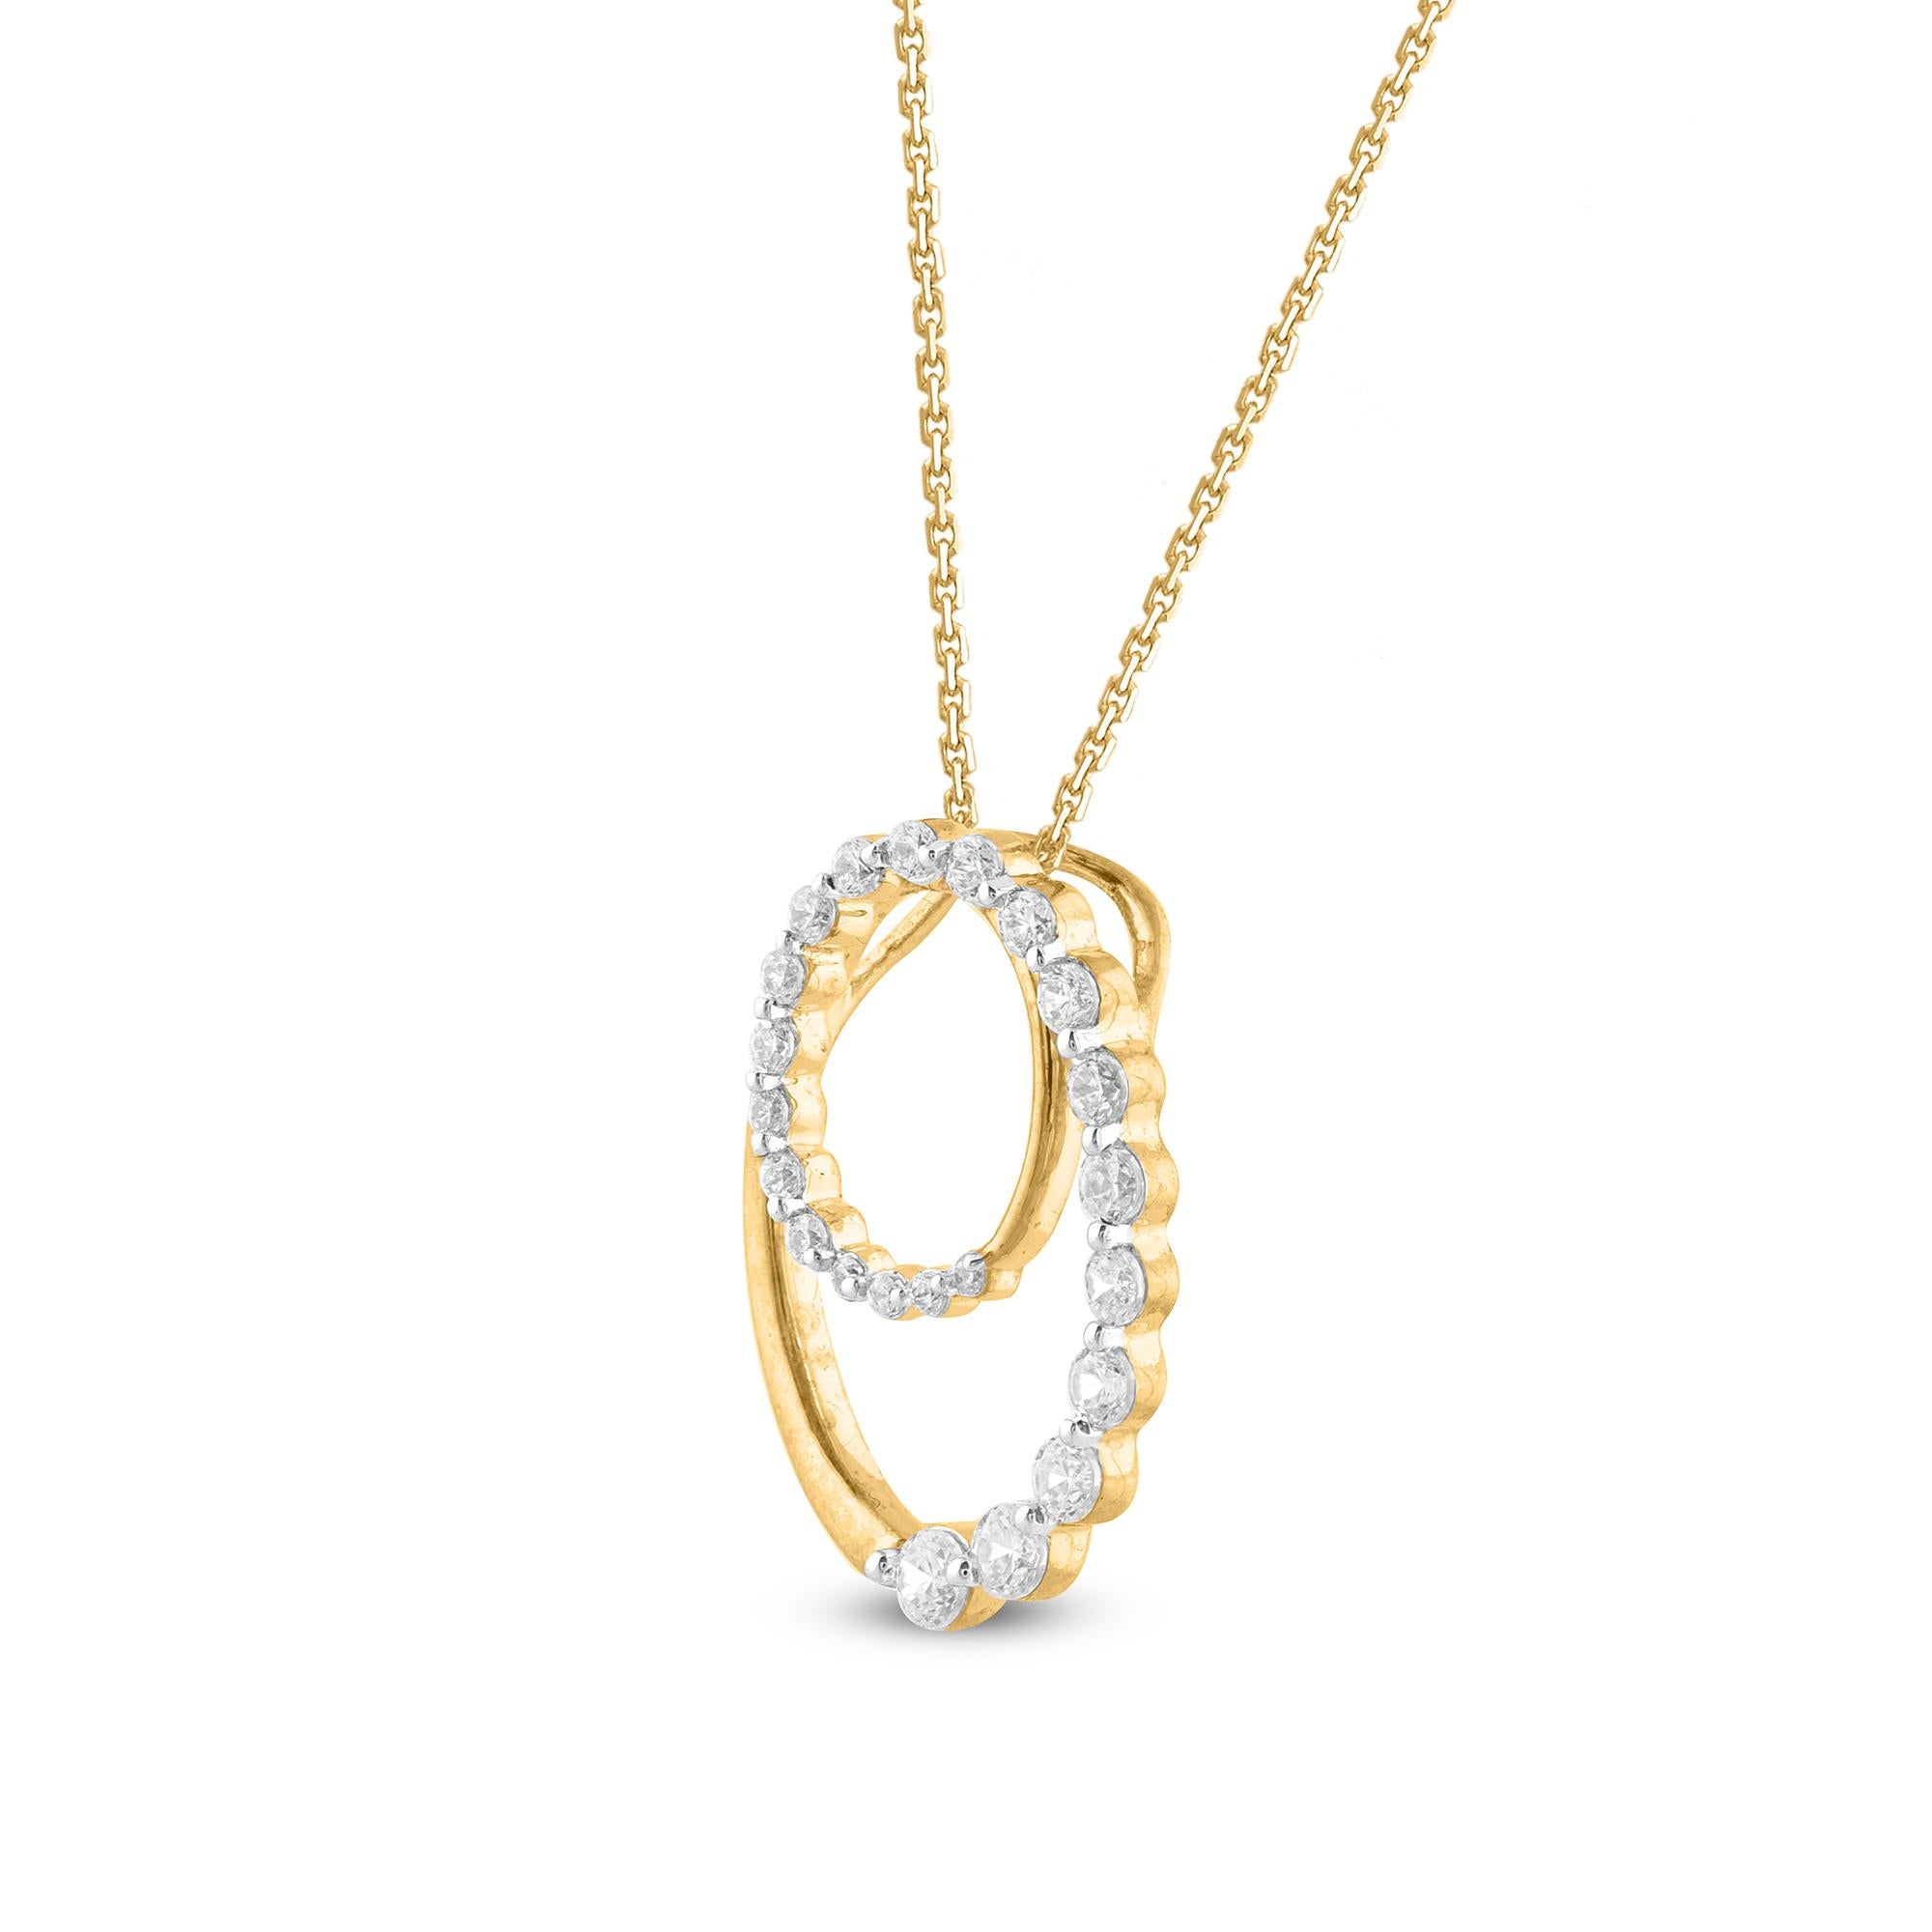 Bring charm to your look with this diamond pendant. The pendant is crafted from 14-karat gold in your choice of white, rose, or yellow, and features Round 22 white diamonds Prong set, H-I color I2 clarity and a high polish finish complete the